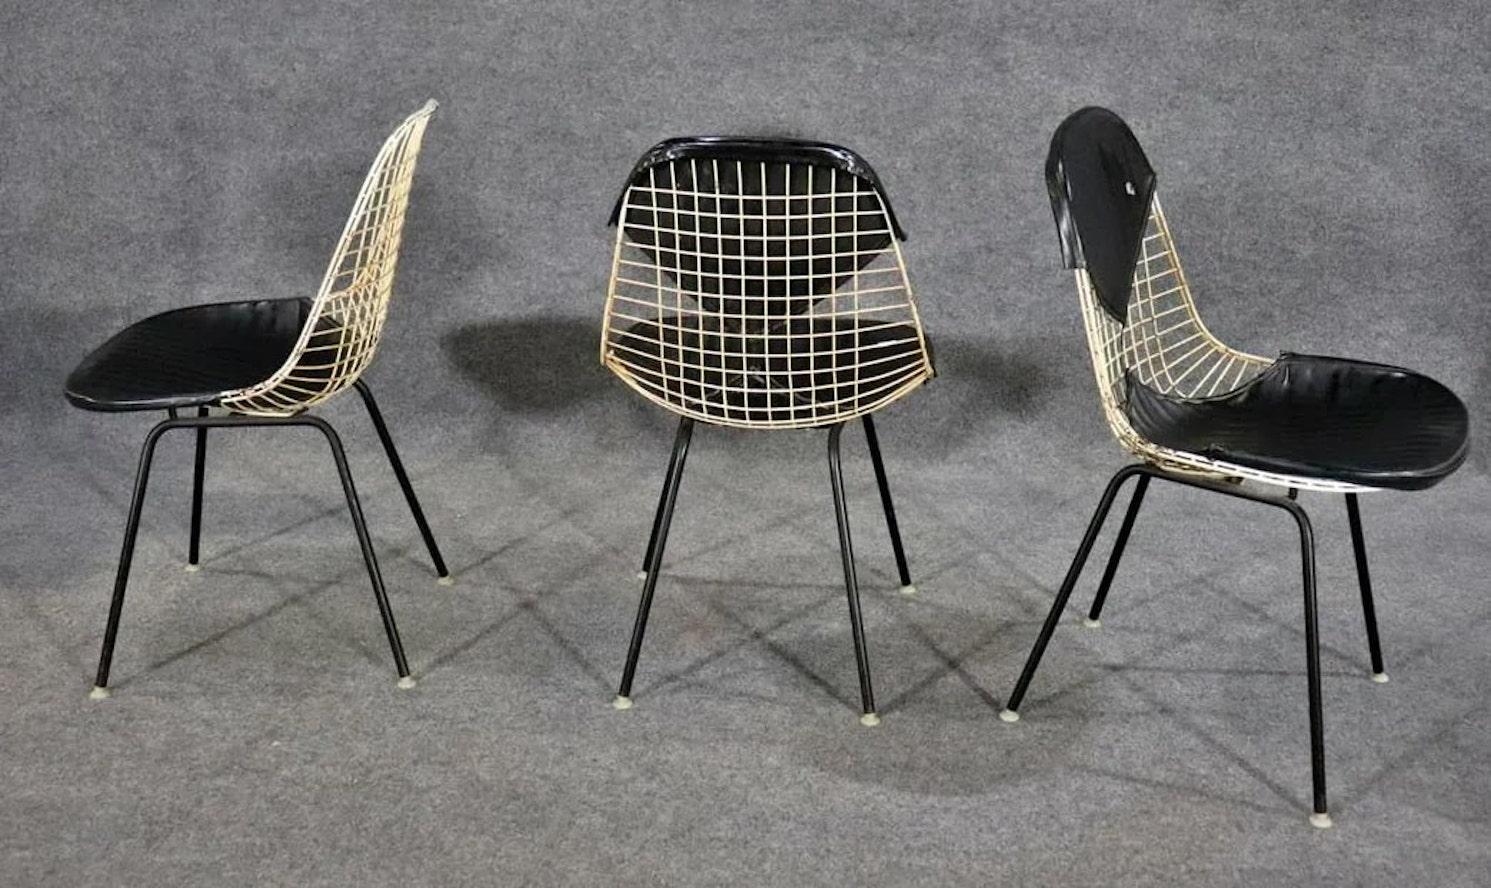 Iconic mid-century wire chairs made by Herman Miller for Eames. Comes with leather bikini covers.
Please confirm location NY or NJ.